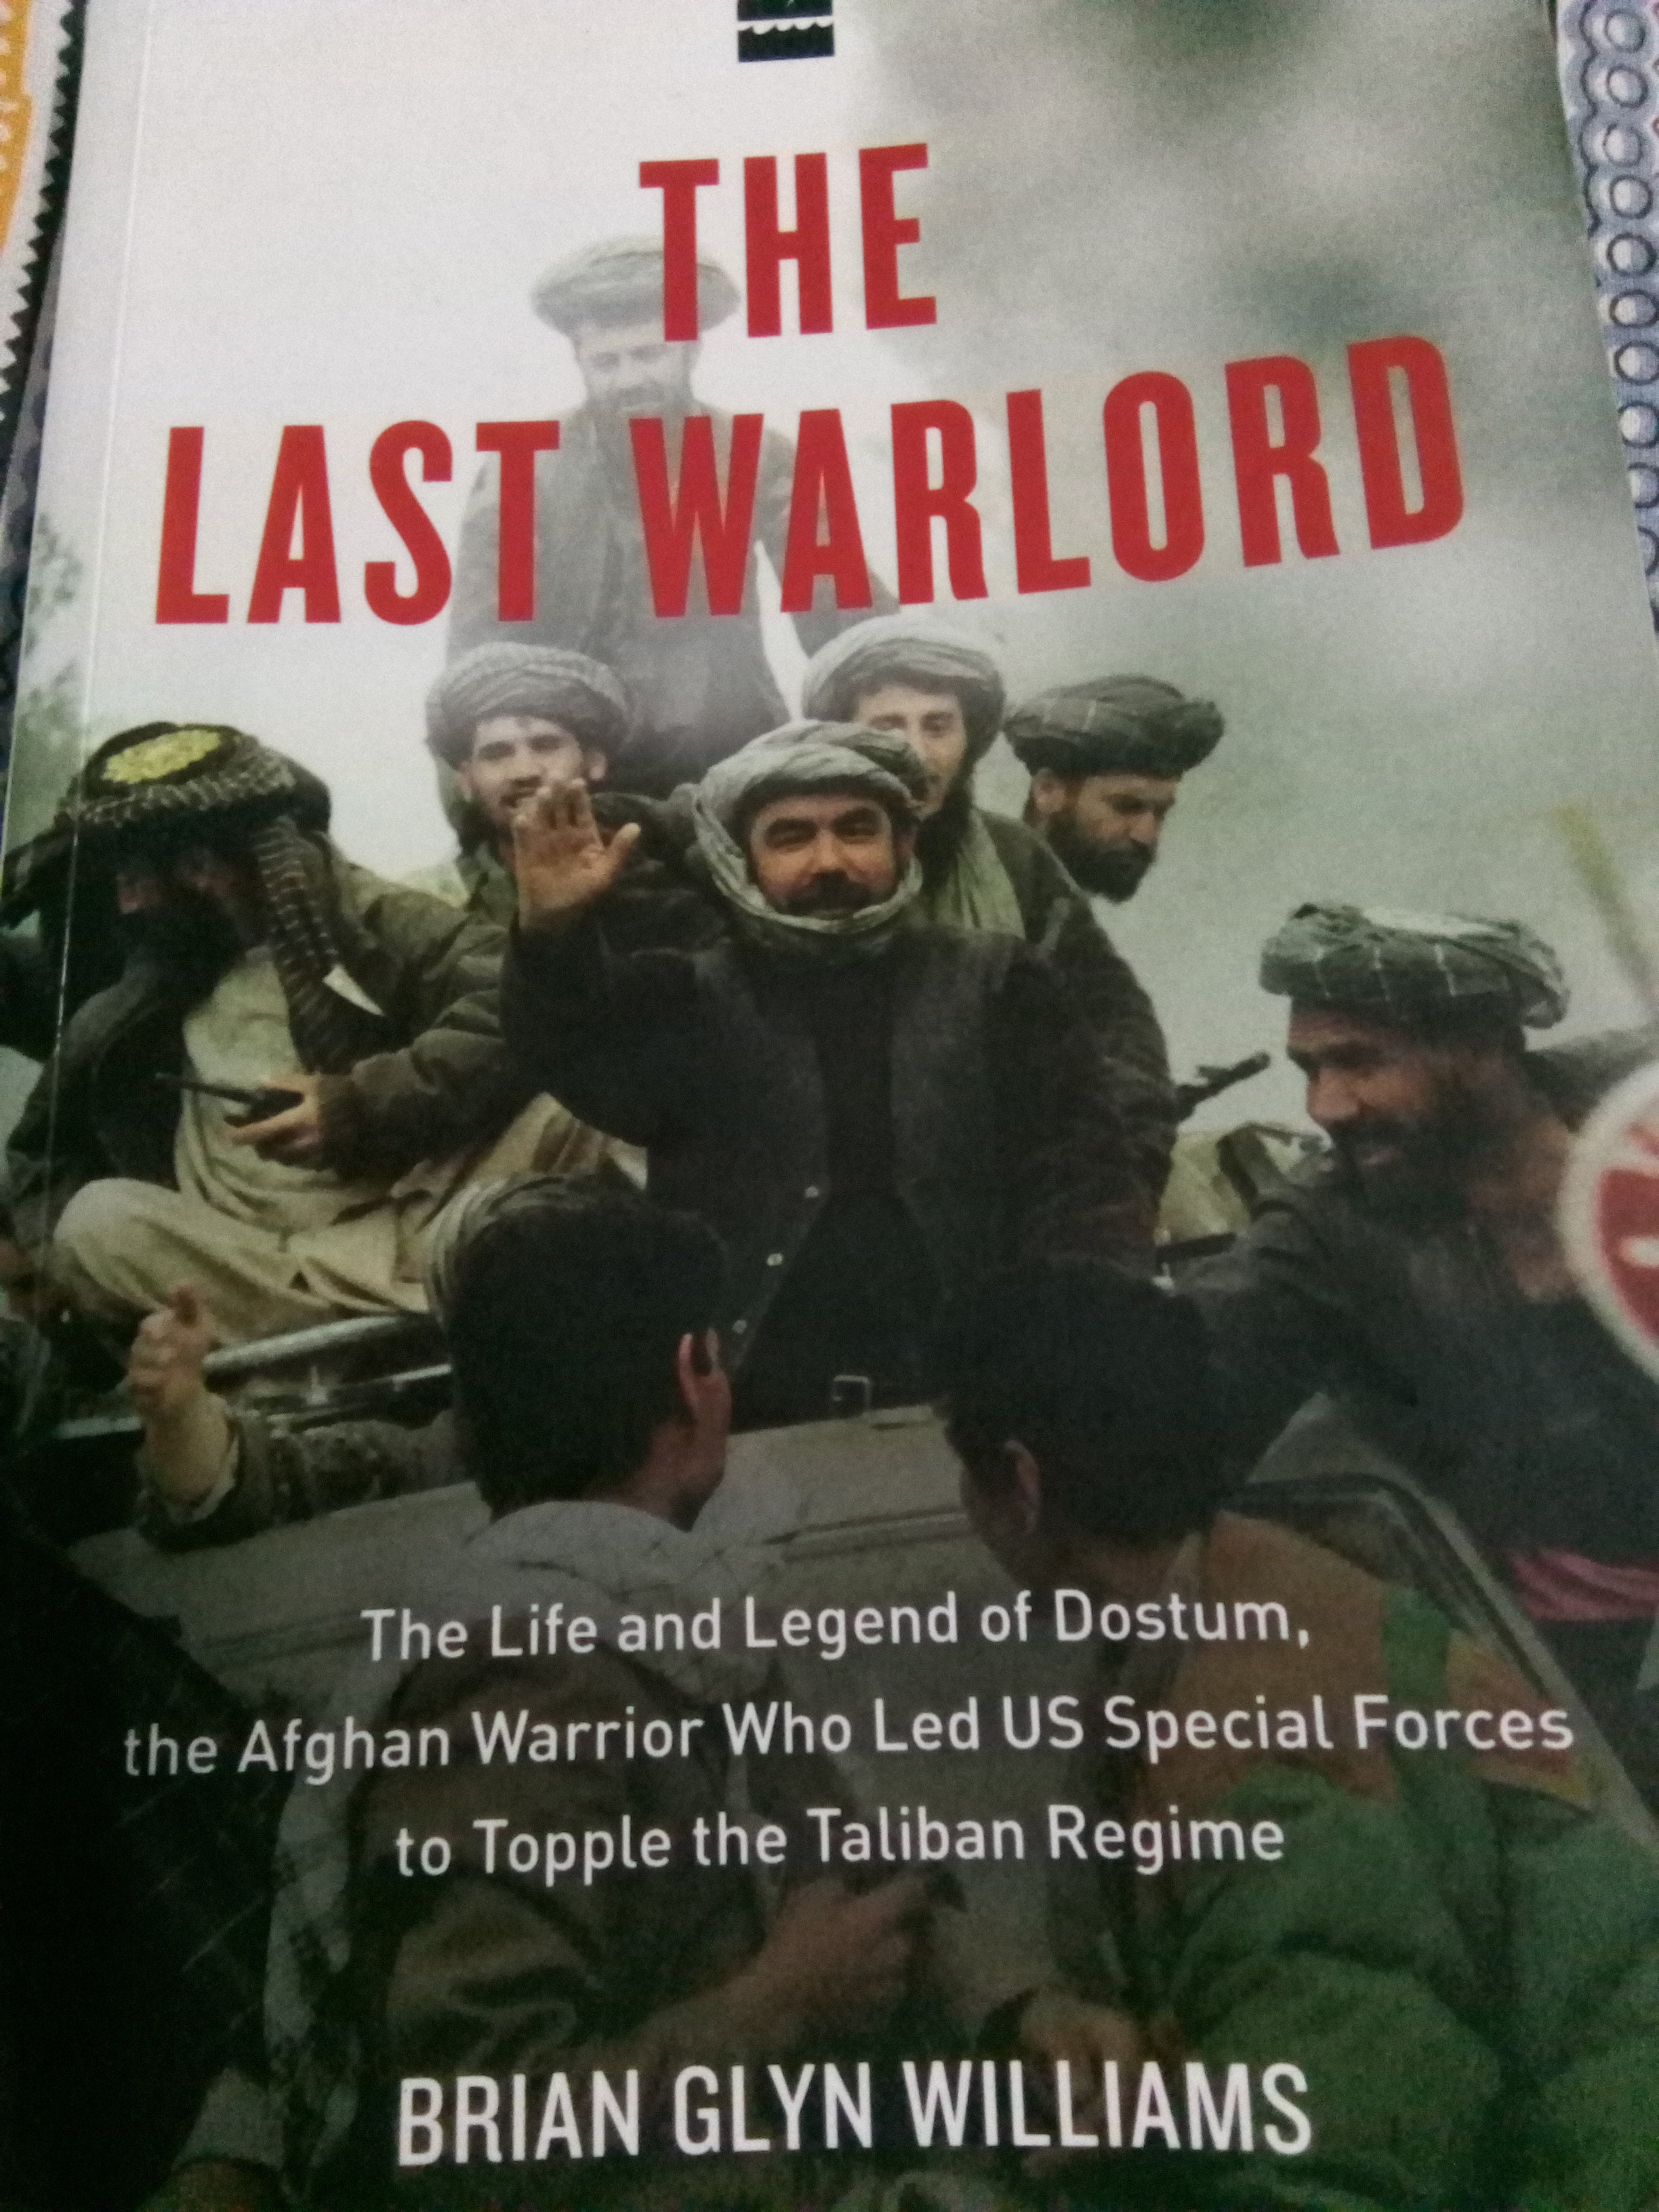 Last Warlord: The Life and Legend of Dostum, the Afghan Warrior Who Led US Special Forces to Topple the Taliban Regime